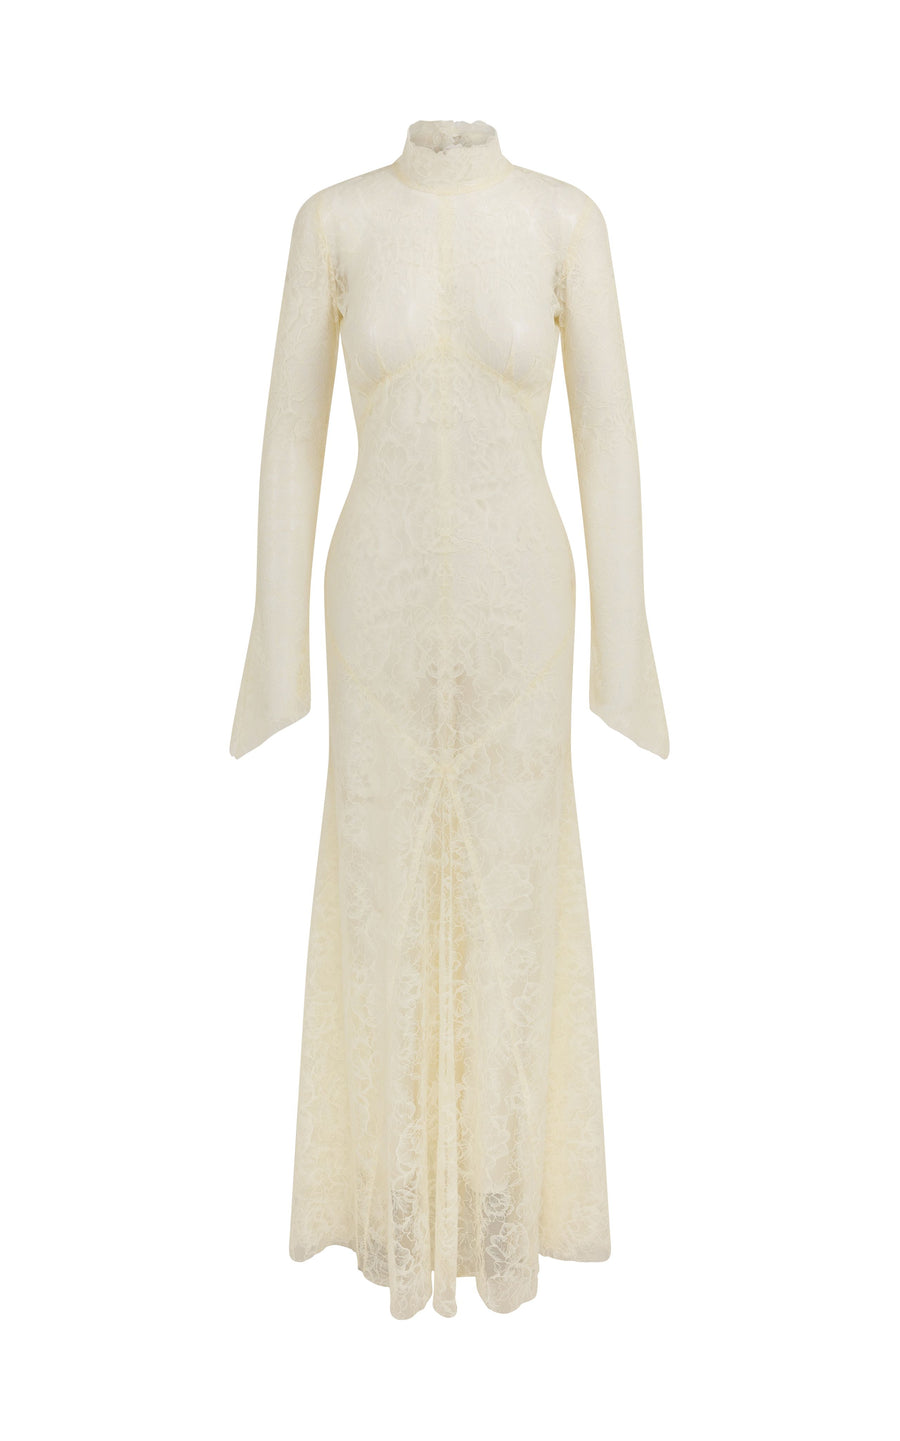 HERMOSA MAXI DRESS IN IVORY LACE